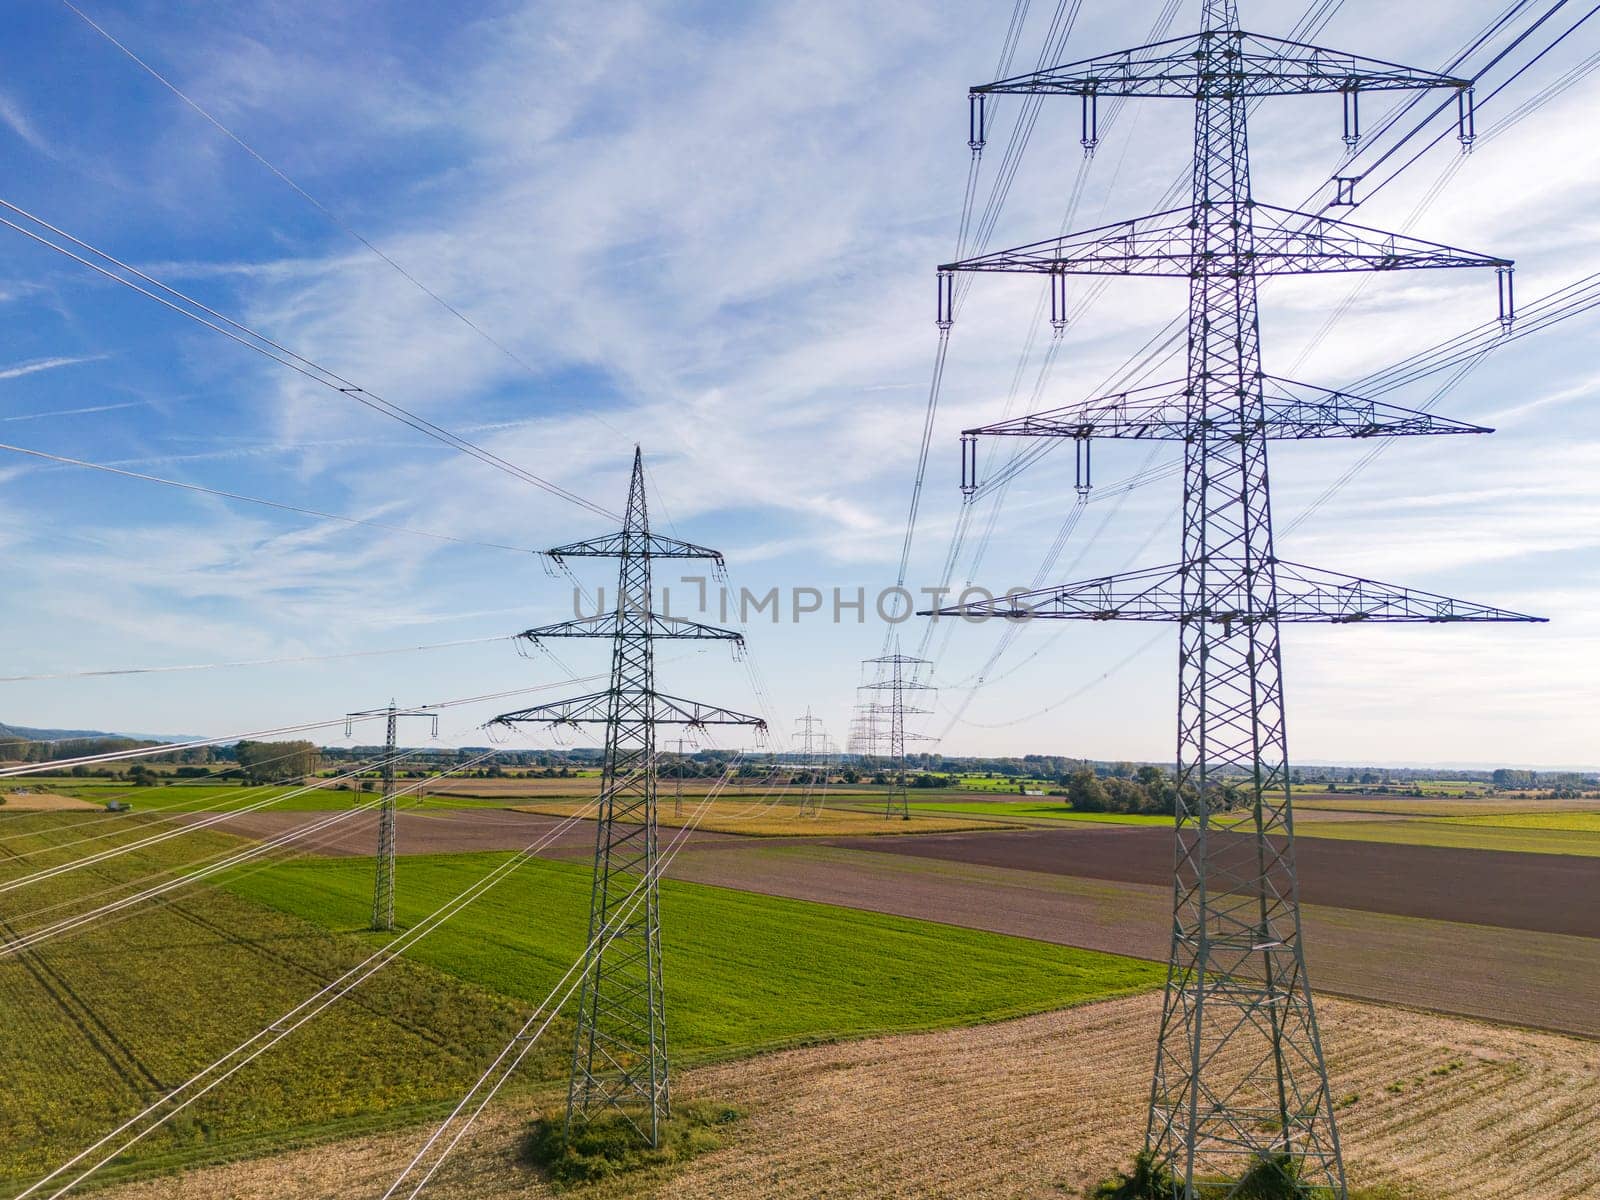 Aerial view of a row of high voltage pylons with many power lines in rural area to the horizon